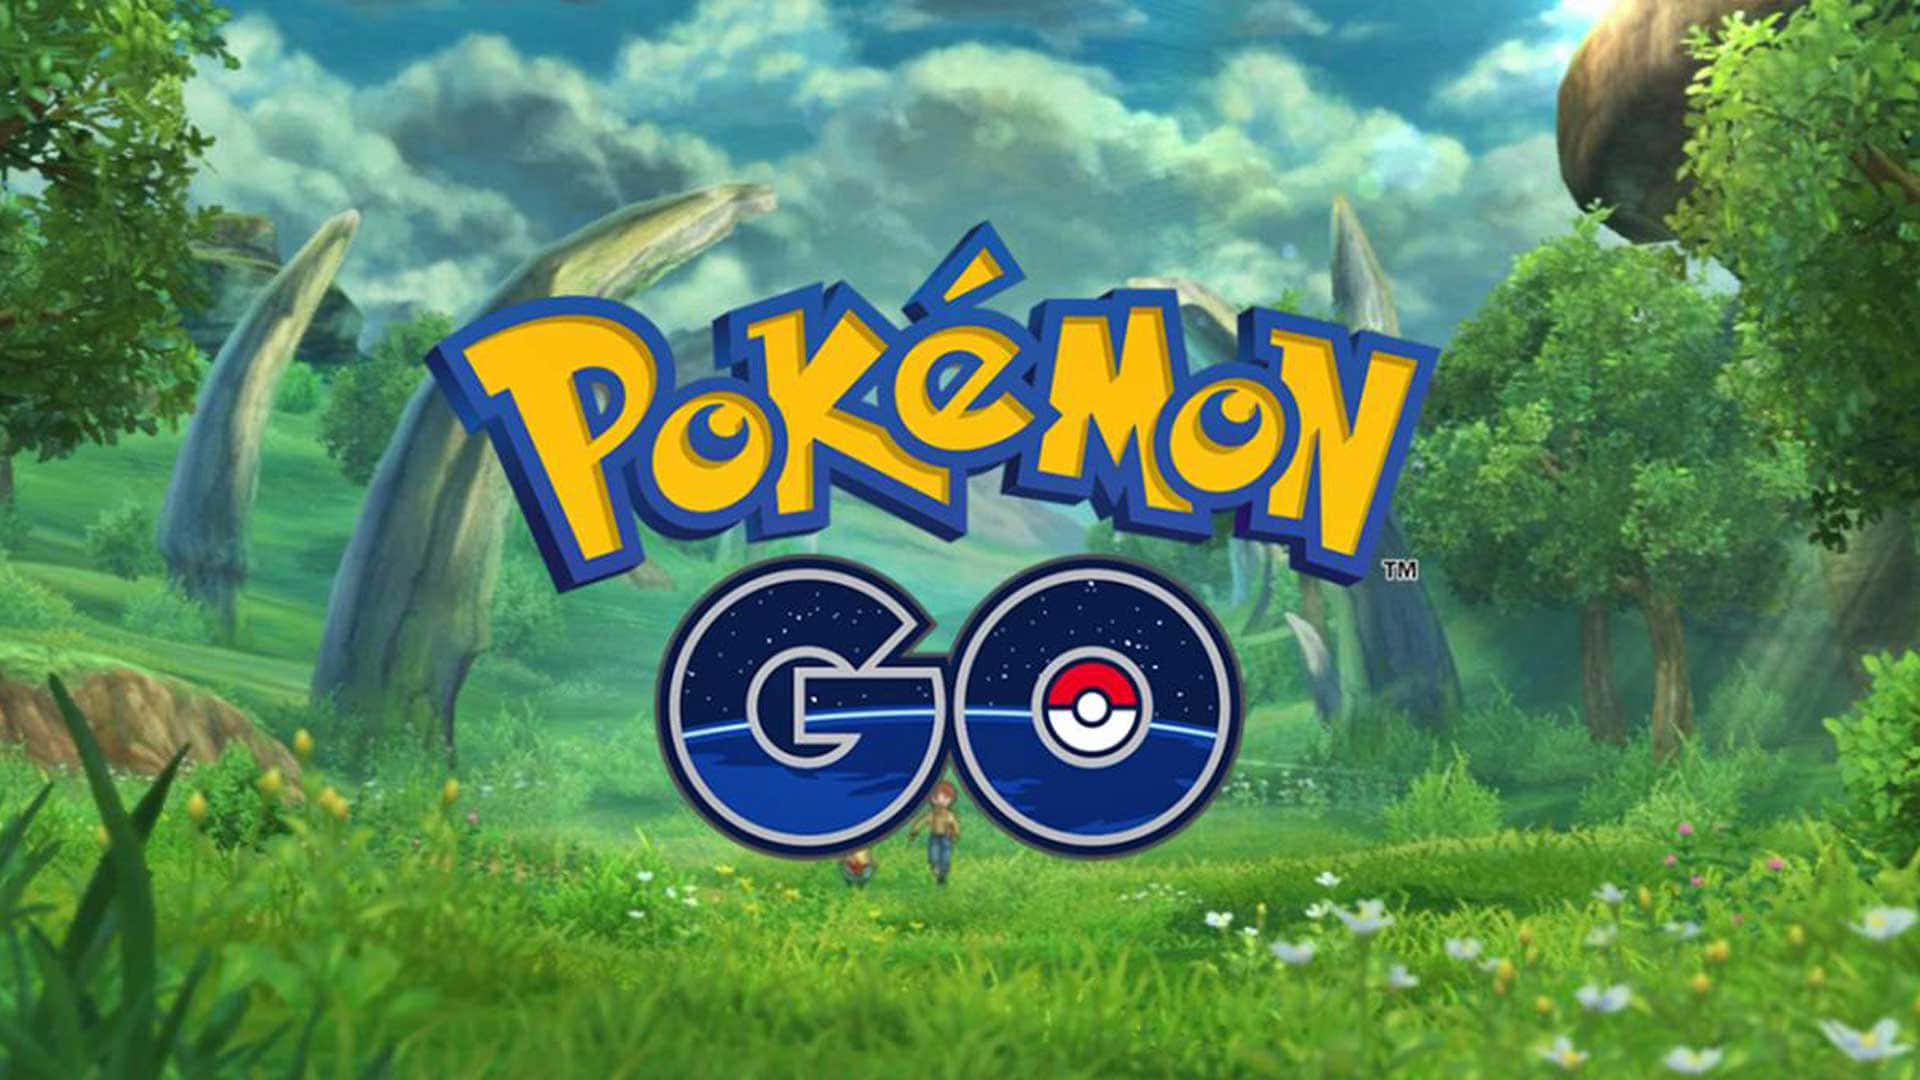 Pokemon Go Logo With Trees And Grass Background